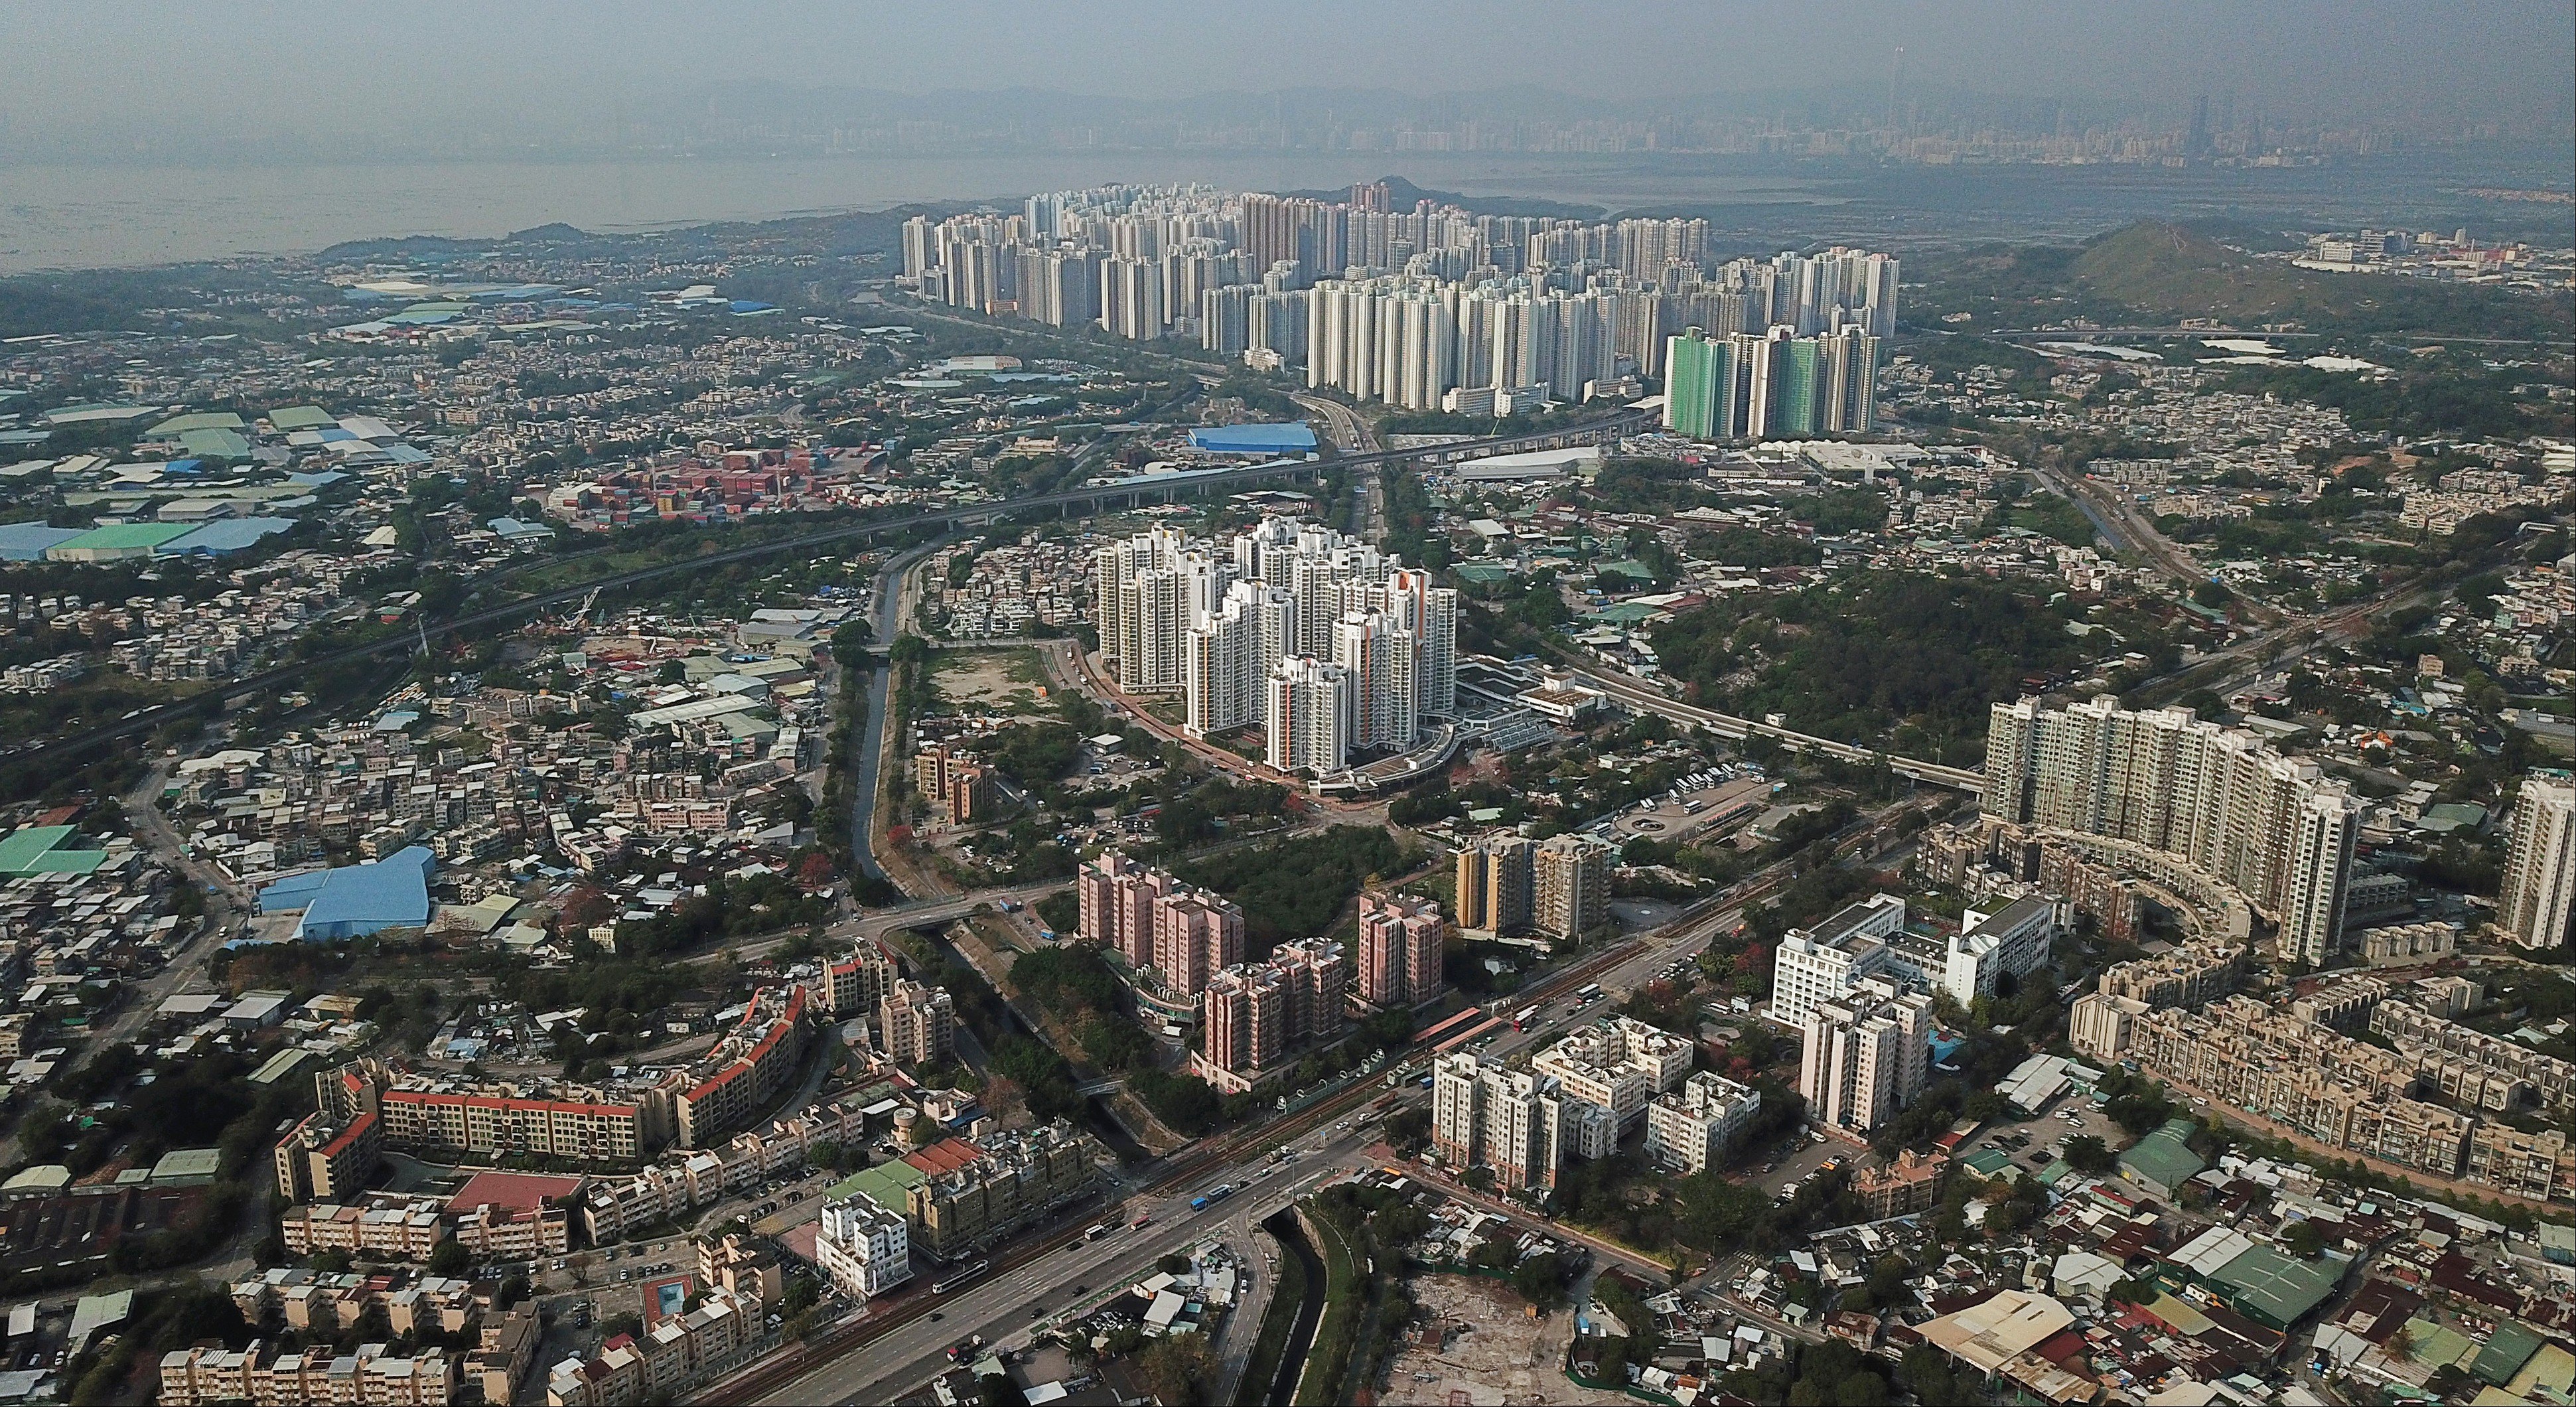 Ping Shan, where the largest brownfield cluster in the New Territories has been identified. Photo: Roy Issa